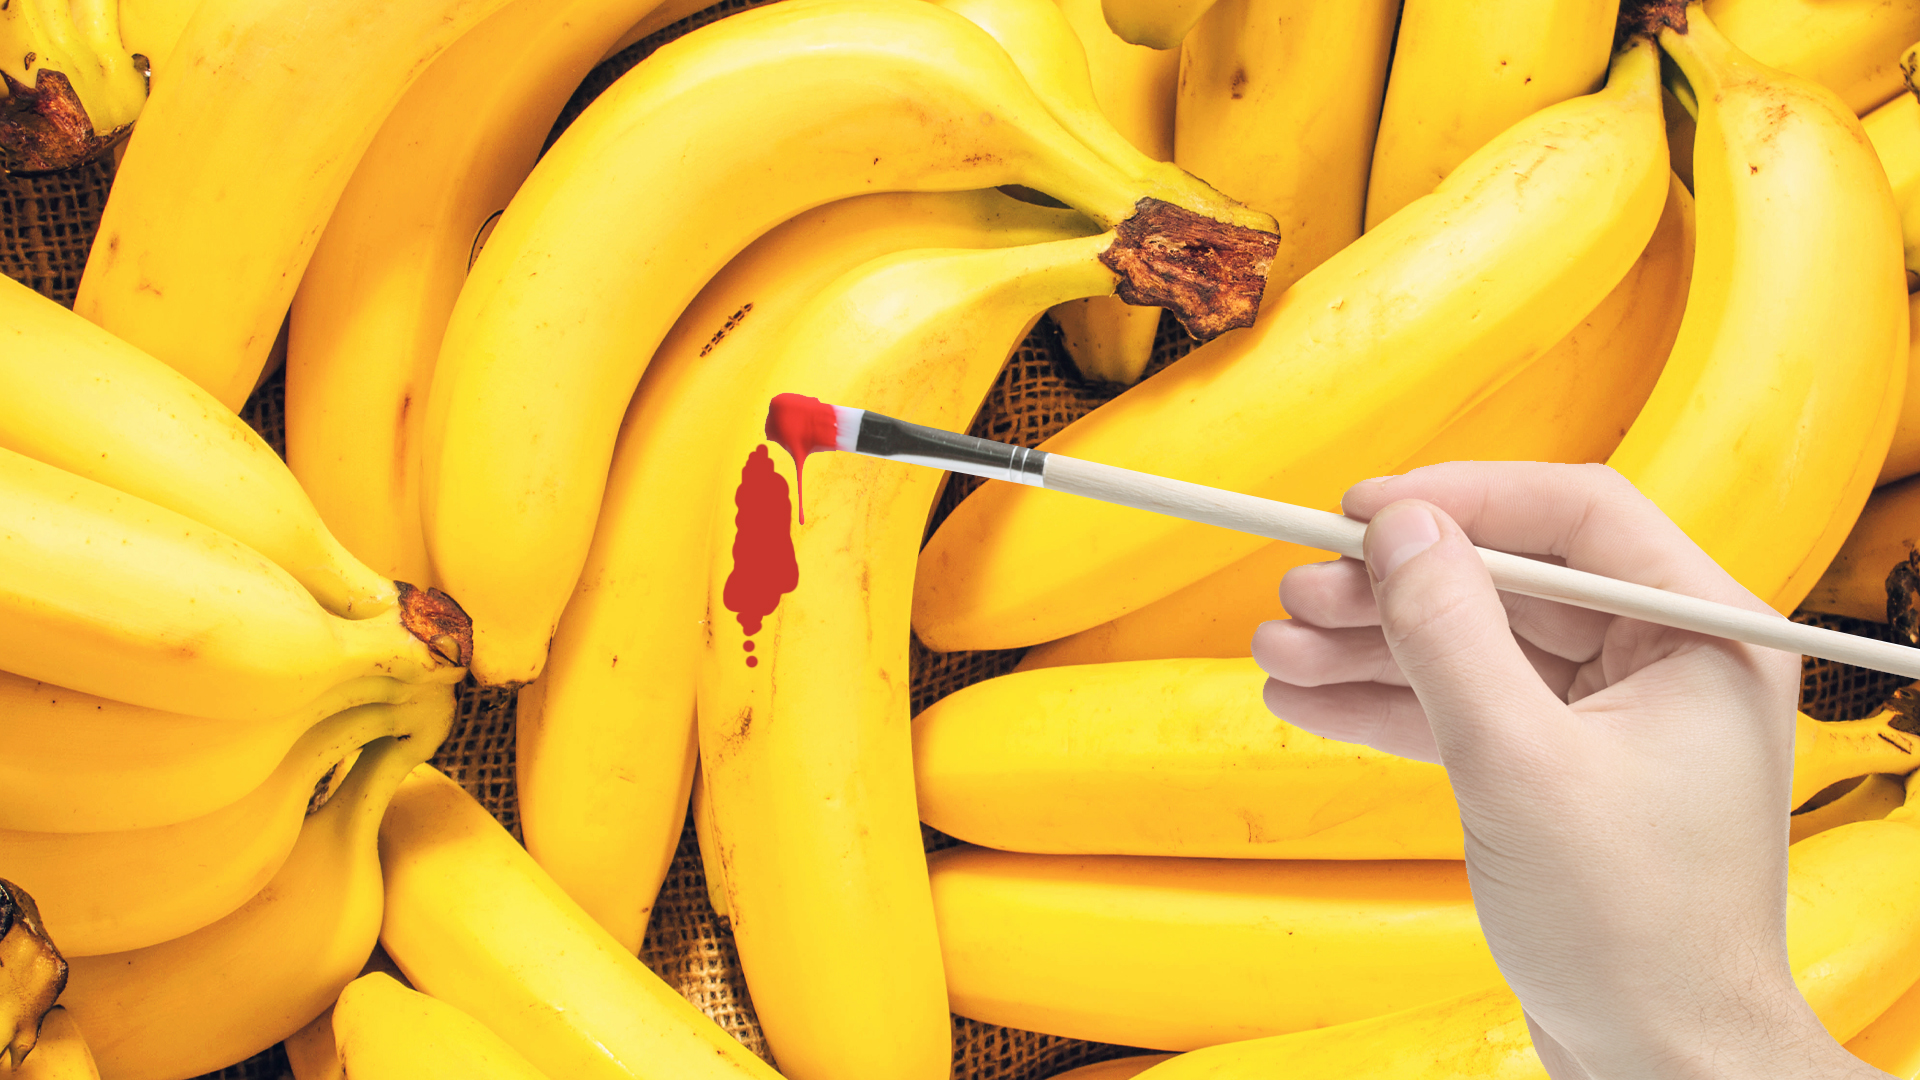 A man painting a banana red